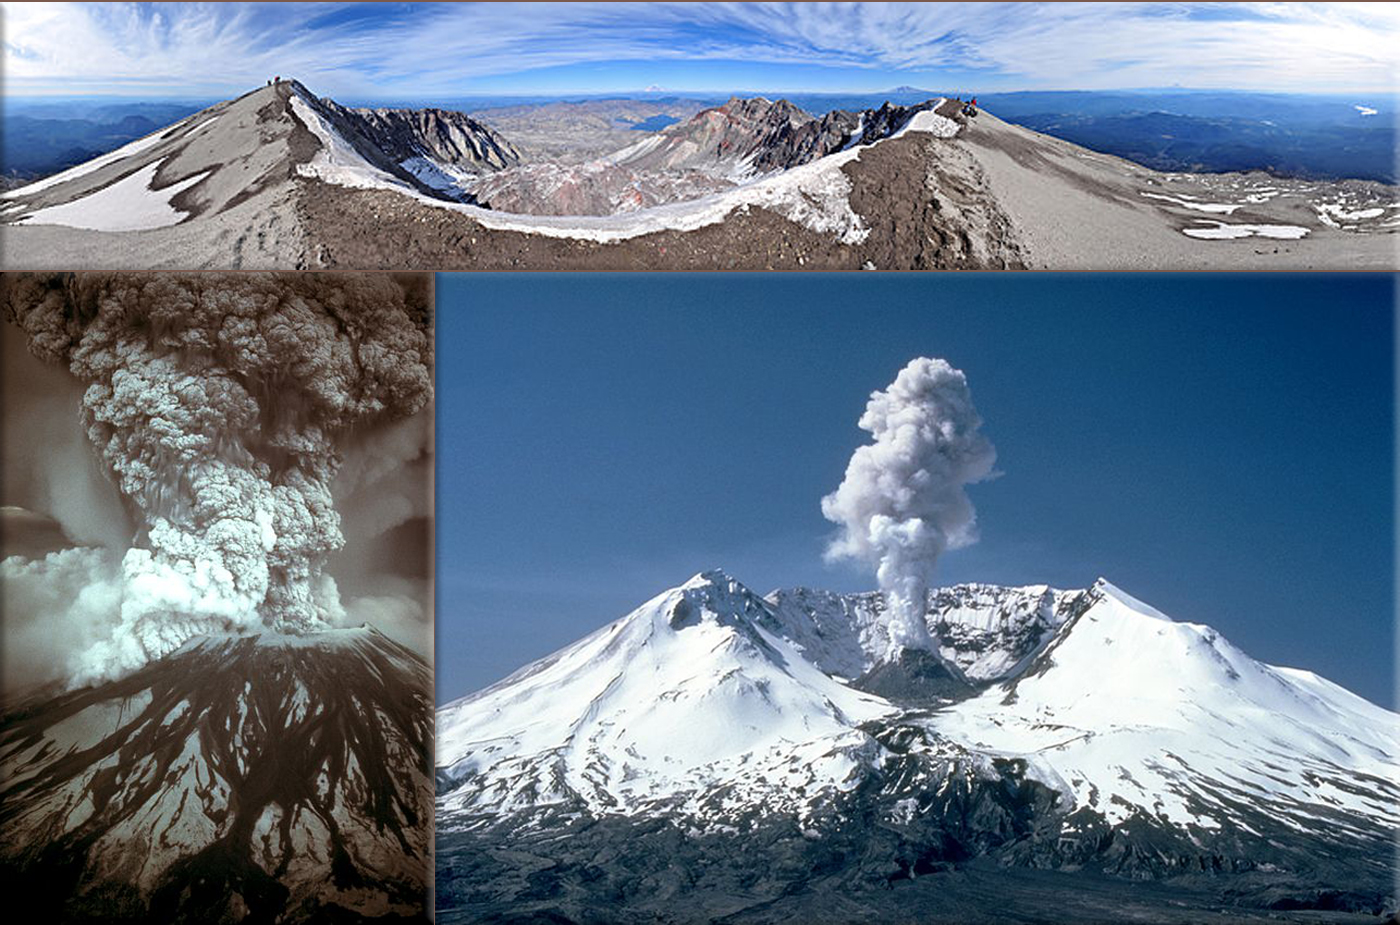 1980 eruption of Mount St. Helens: Mount St. Helens erupts in Washington, United States, killing 57 people and causing $3 billion in damage